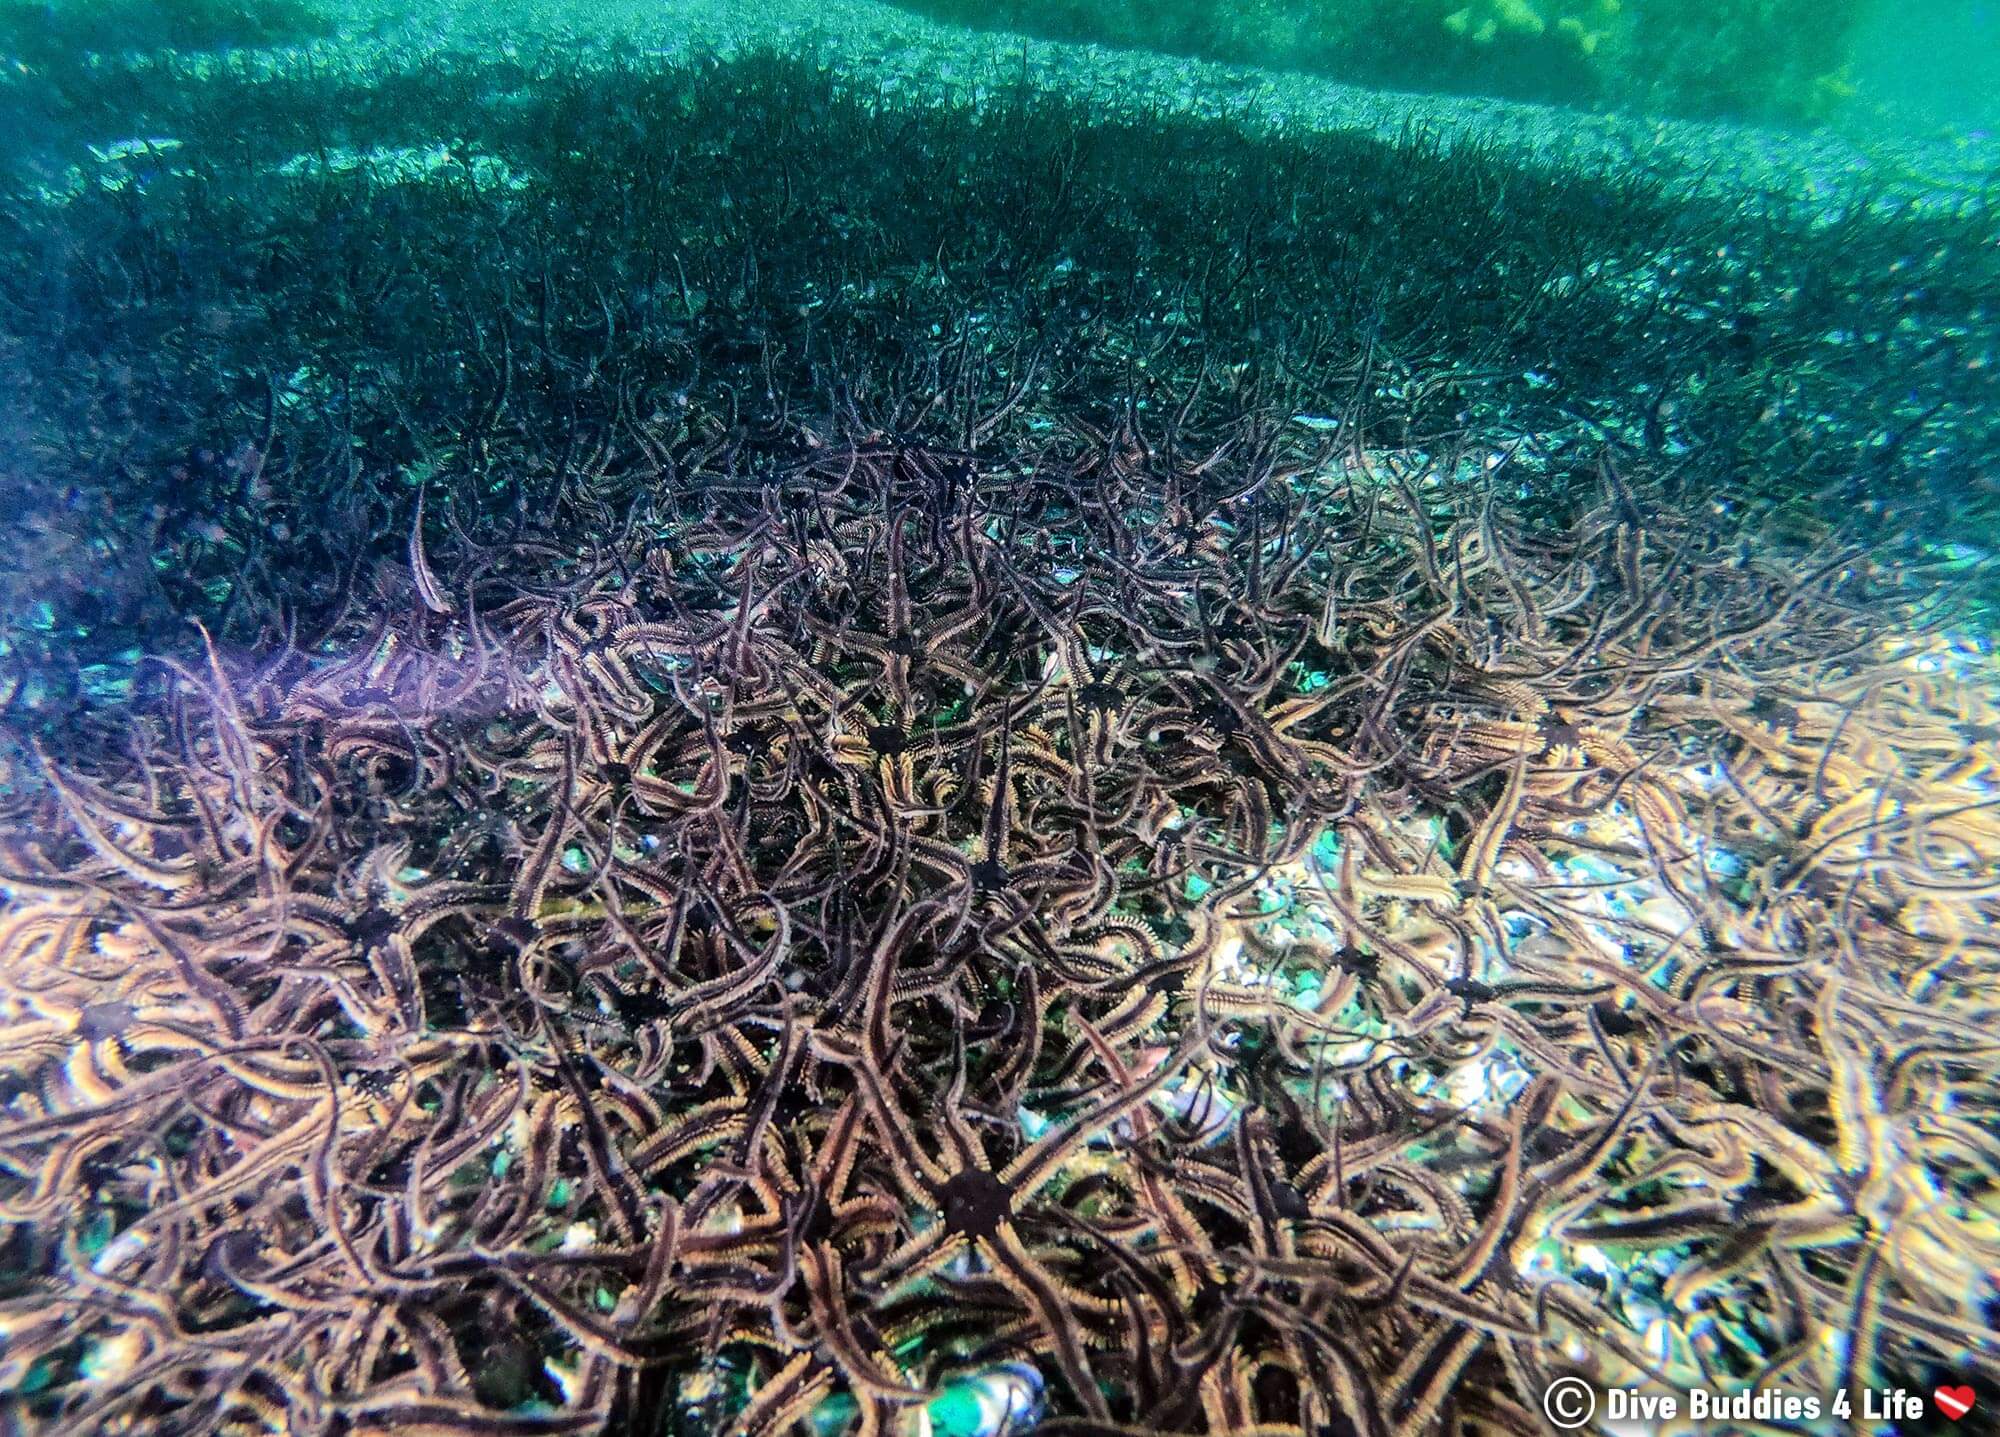 A Huge Aggregation Of Black Brittle Stars On The Bottom Of The Ocean In Carnac, France